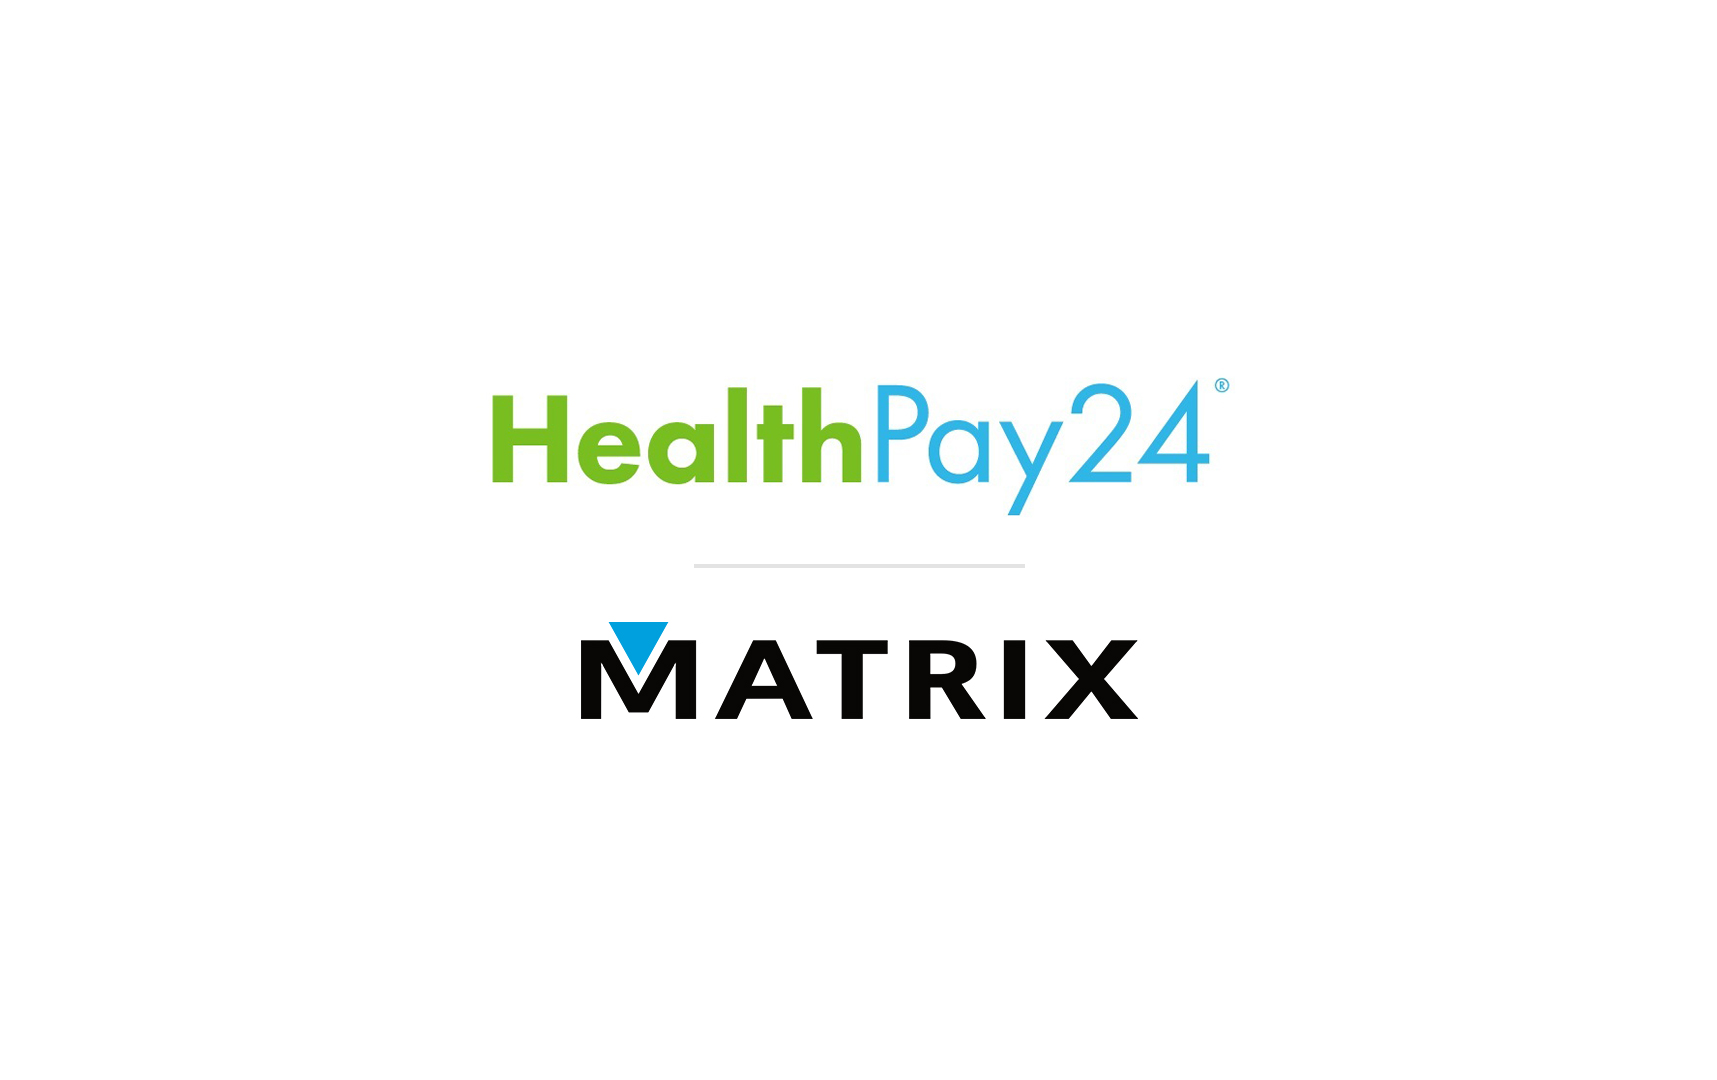 Matrix Imaging Solutions Partners with HealthPay24 to Bring a Collaborative Patient Experience to the Healthcare Industry 